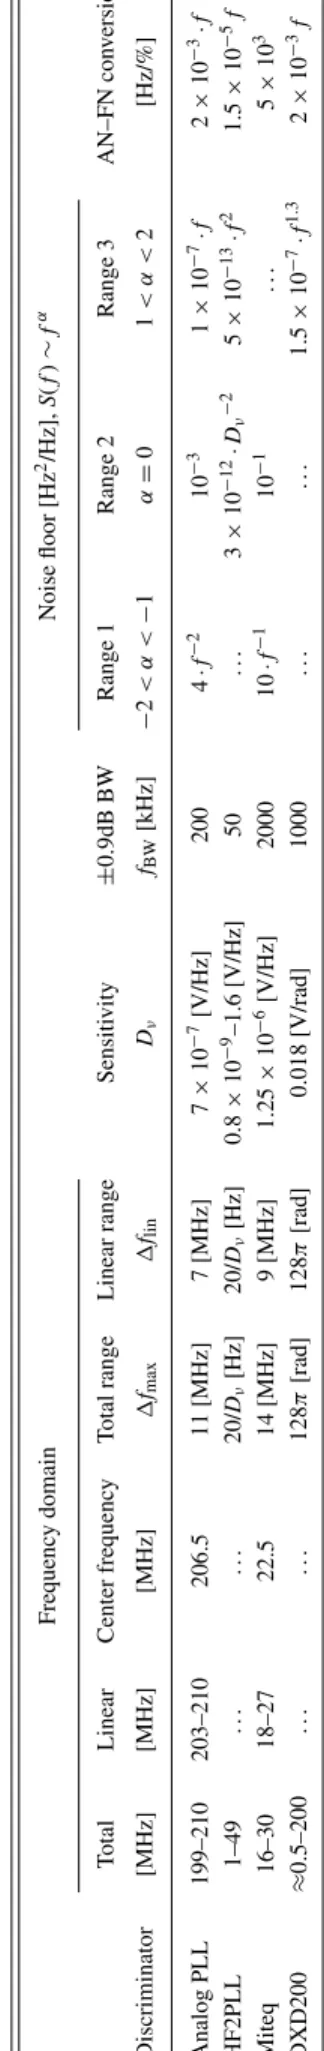 FIG. 6. (Color online) Cross-sensitivity of the discriminators to amplitude modulation (a) and to amplitude noise (b), expressed in terms of  AM-to-FM (AN-to-FN) conversion factor (in Hz/%)